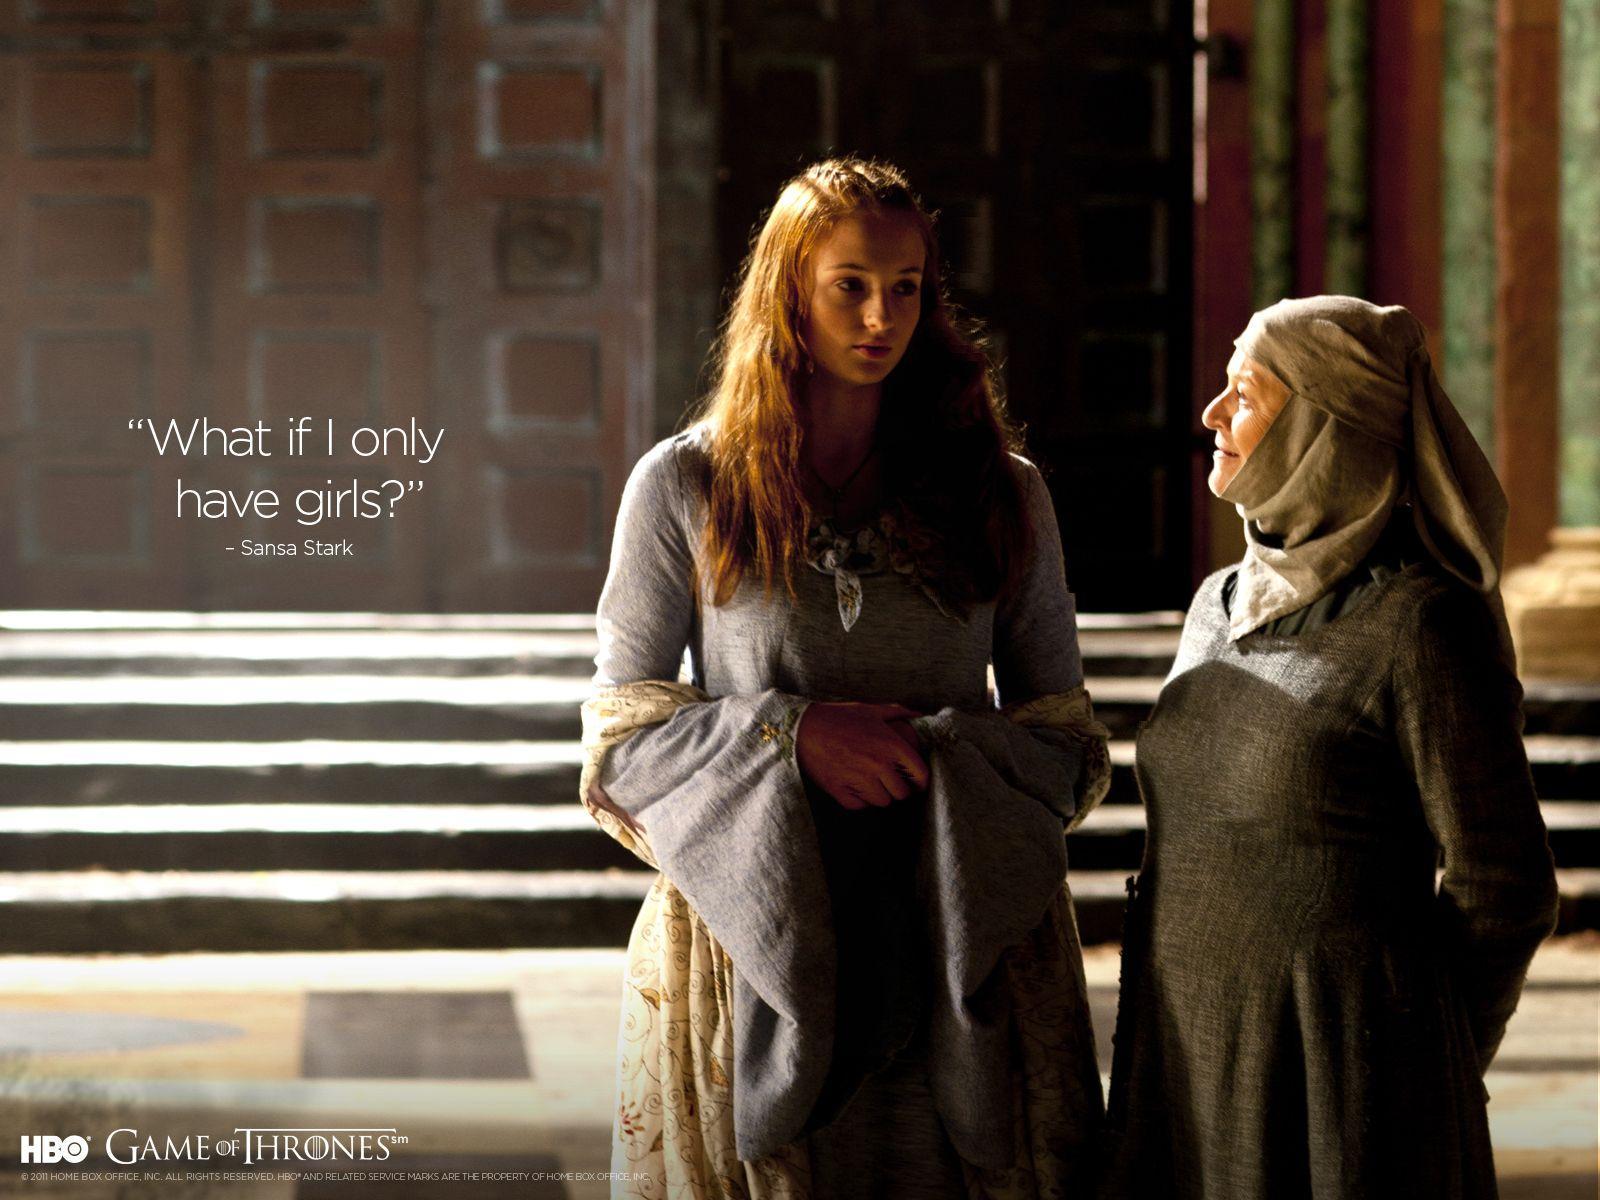 HBO: Game of Thrones: Extras: Quote Wallpaper